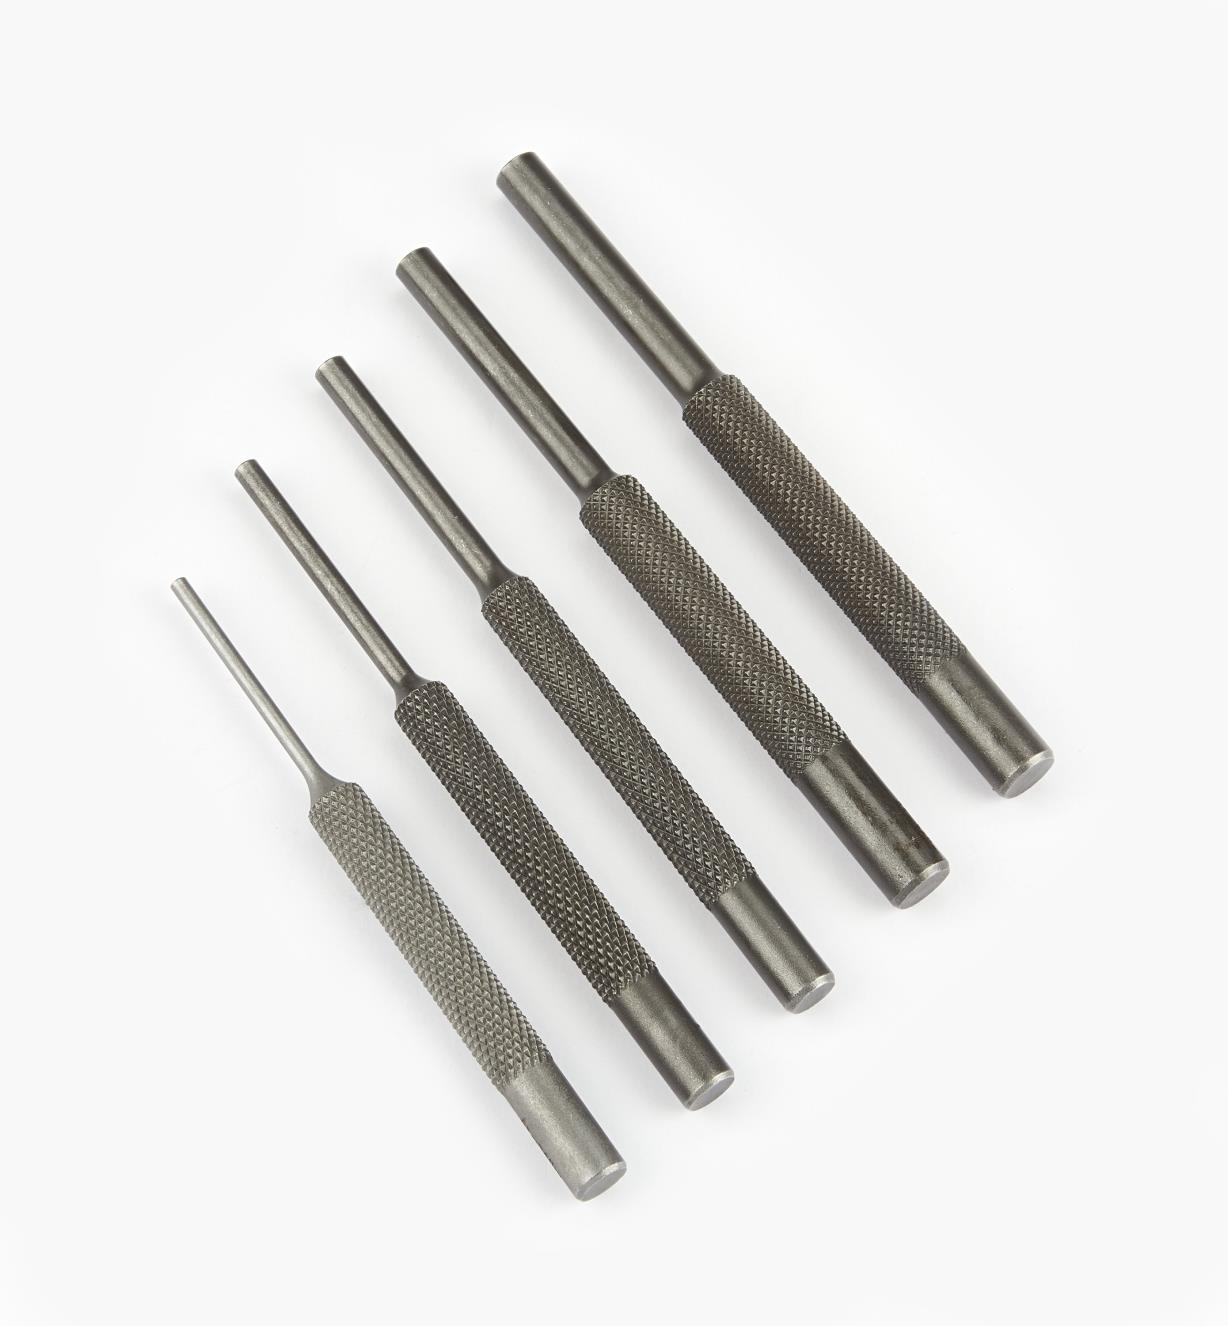 33Y0201 - Set of 5 Pin Punches